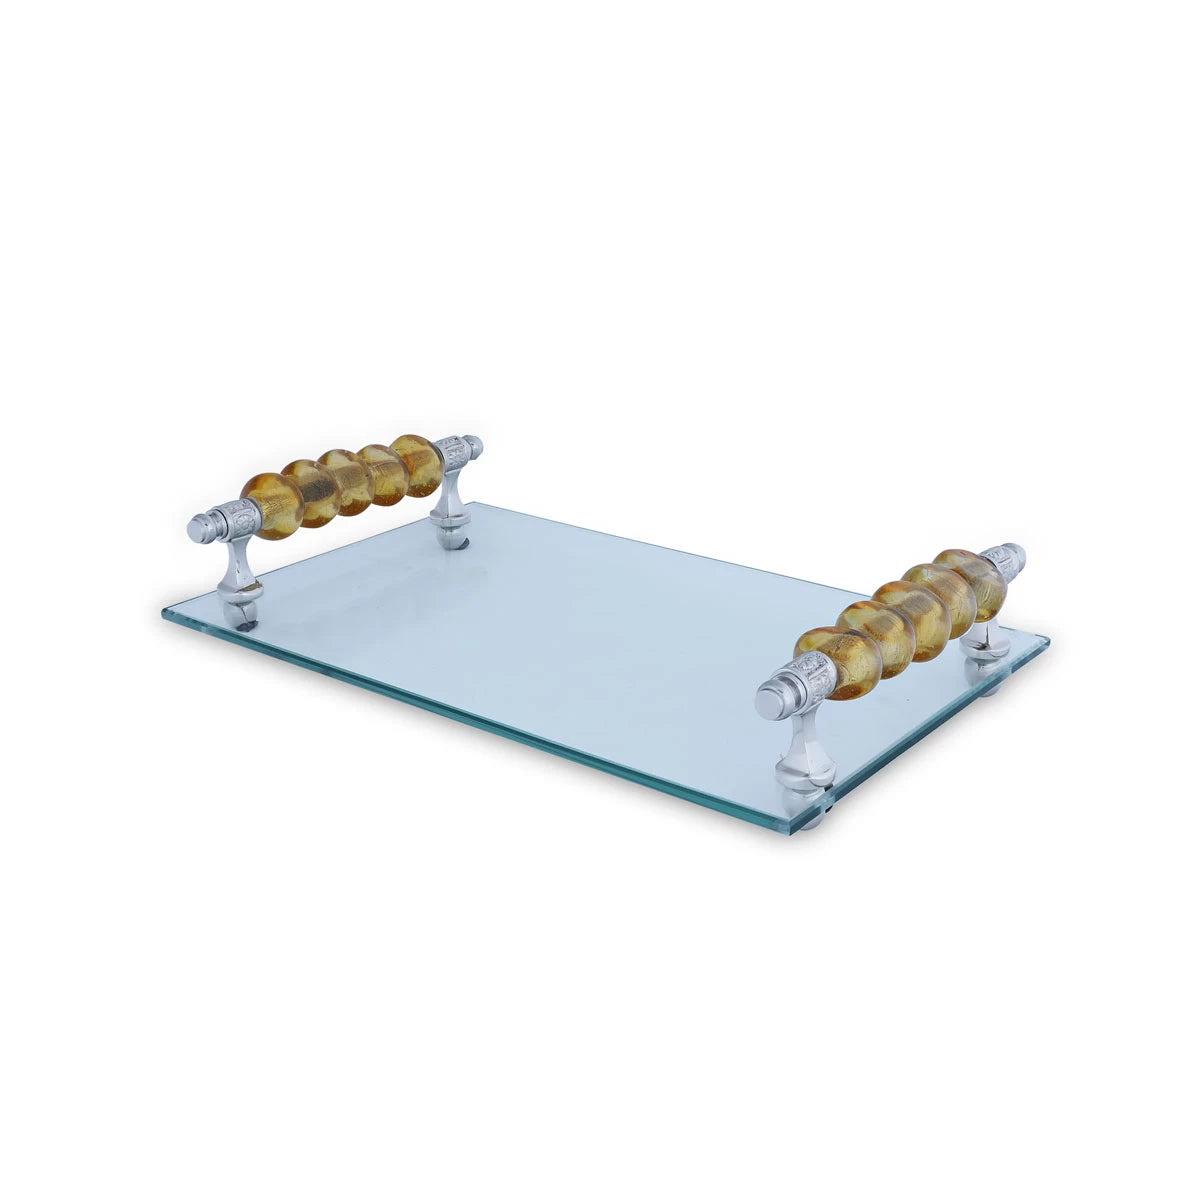 Angled View of Glass Tray with Yellow Colored Beaded Handles